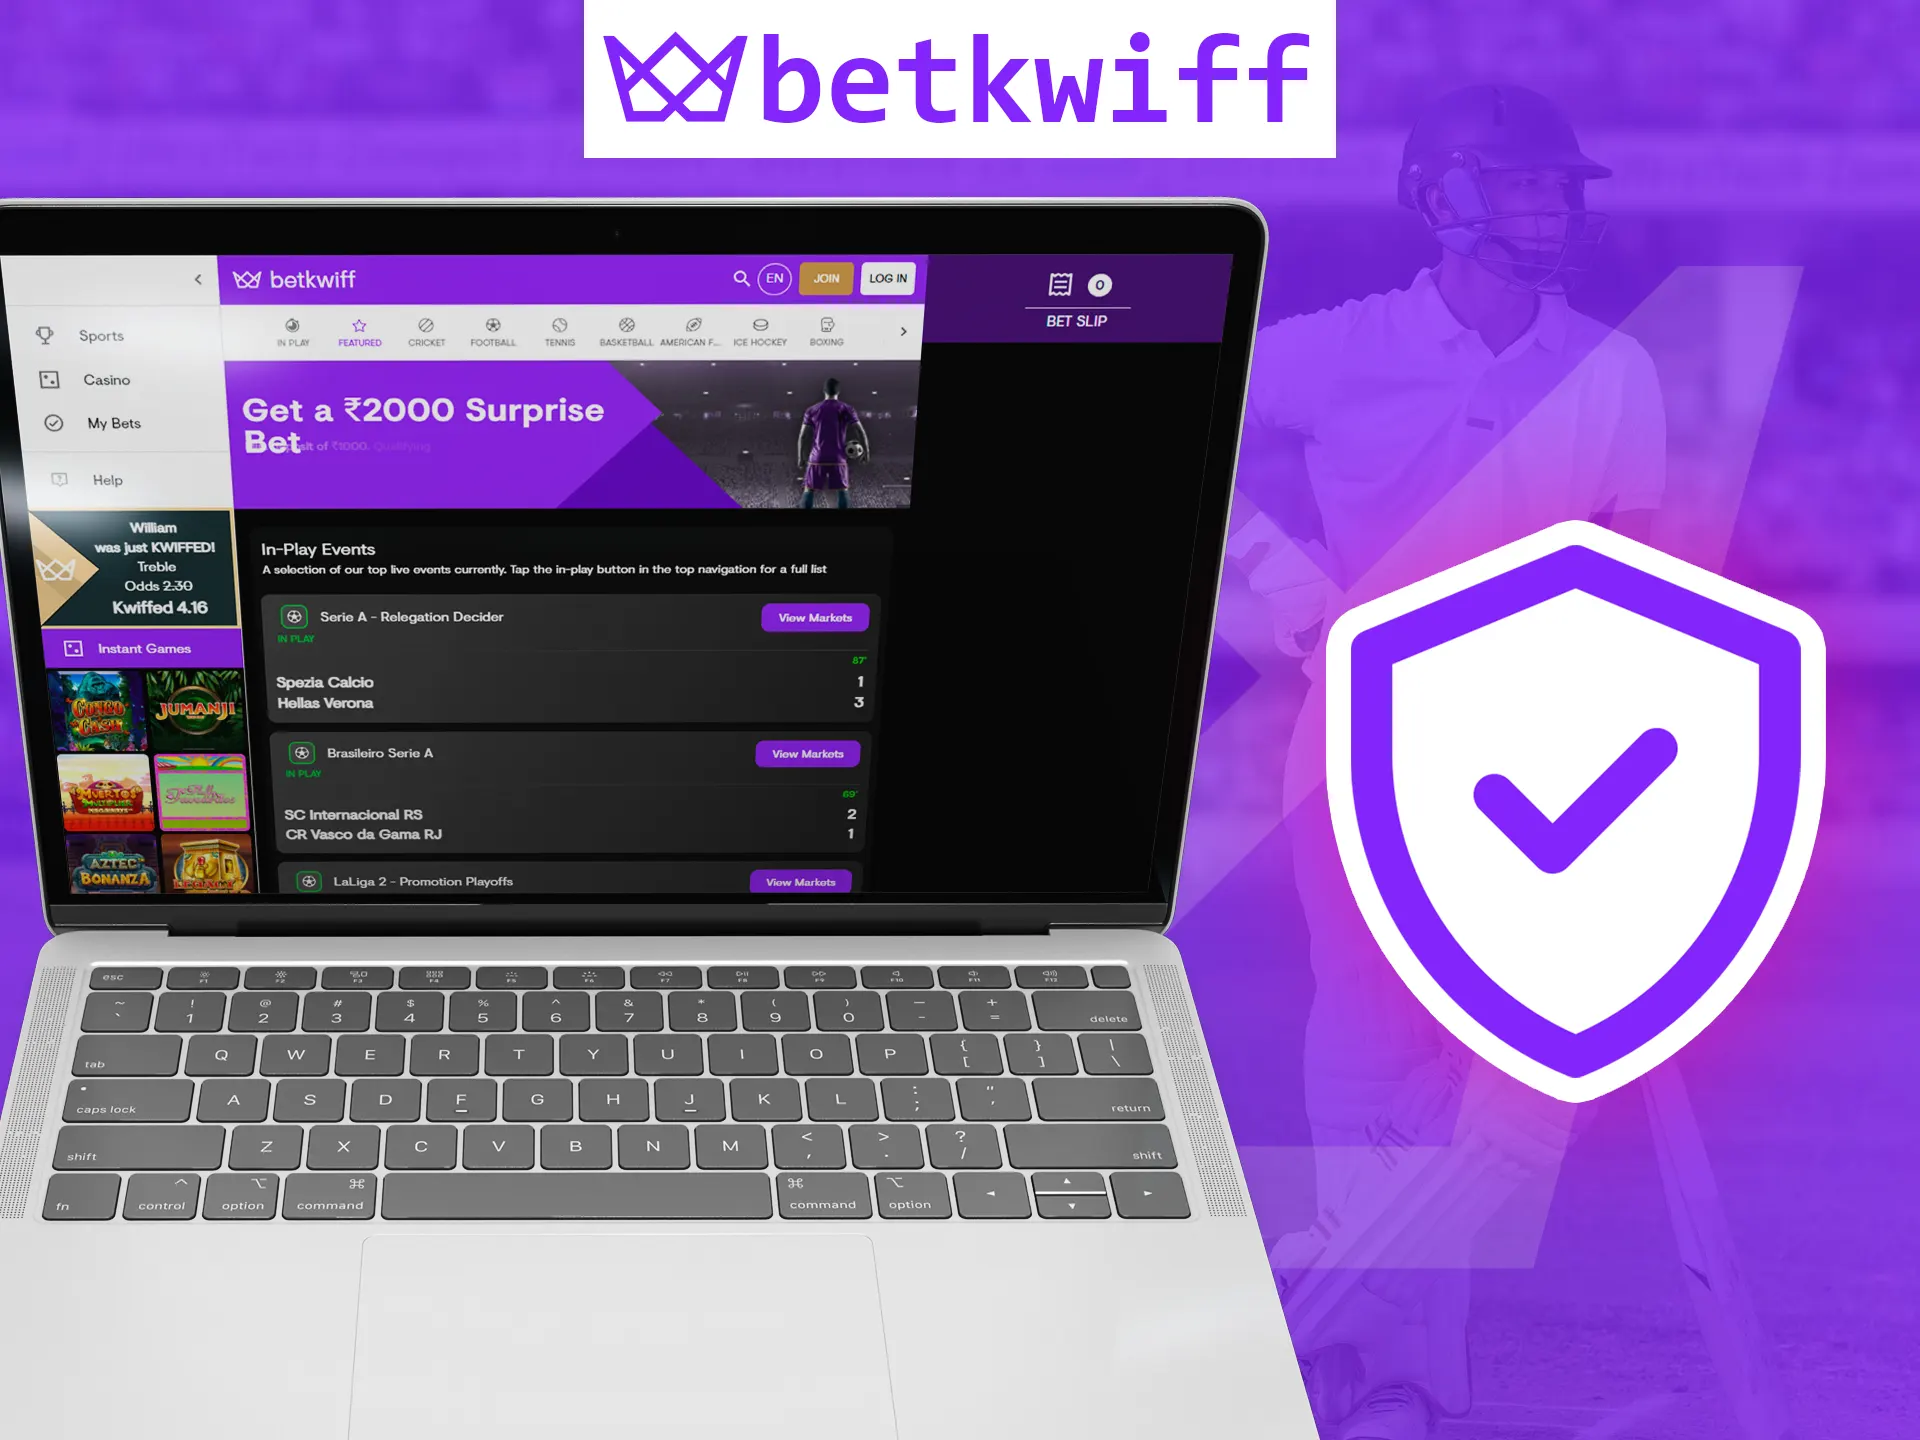 Betkwiff is safe for players, data will be secure.